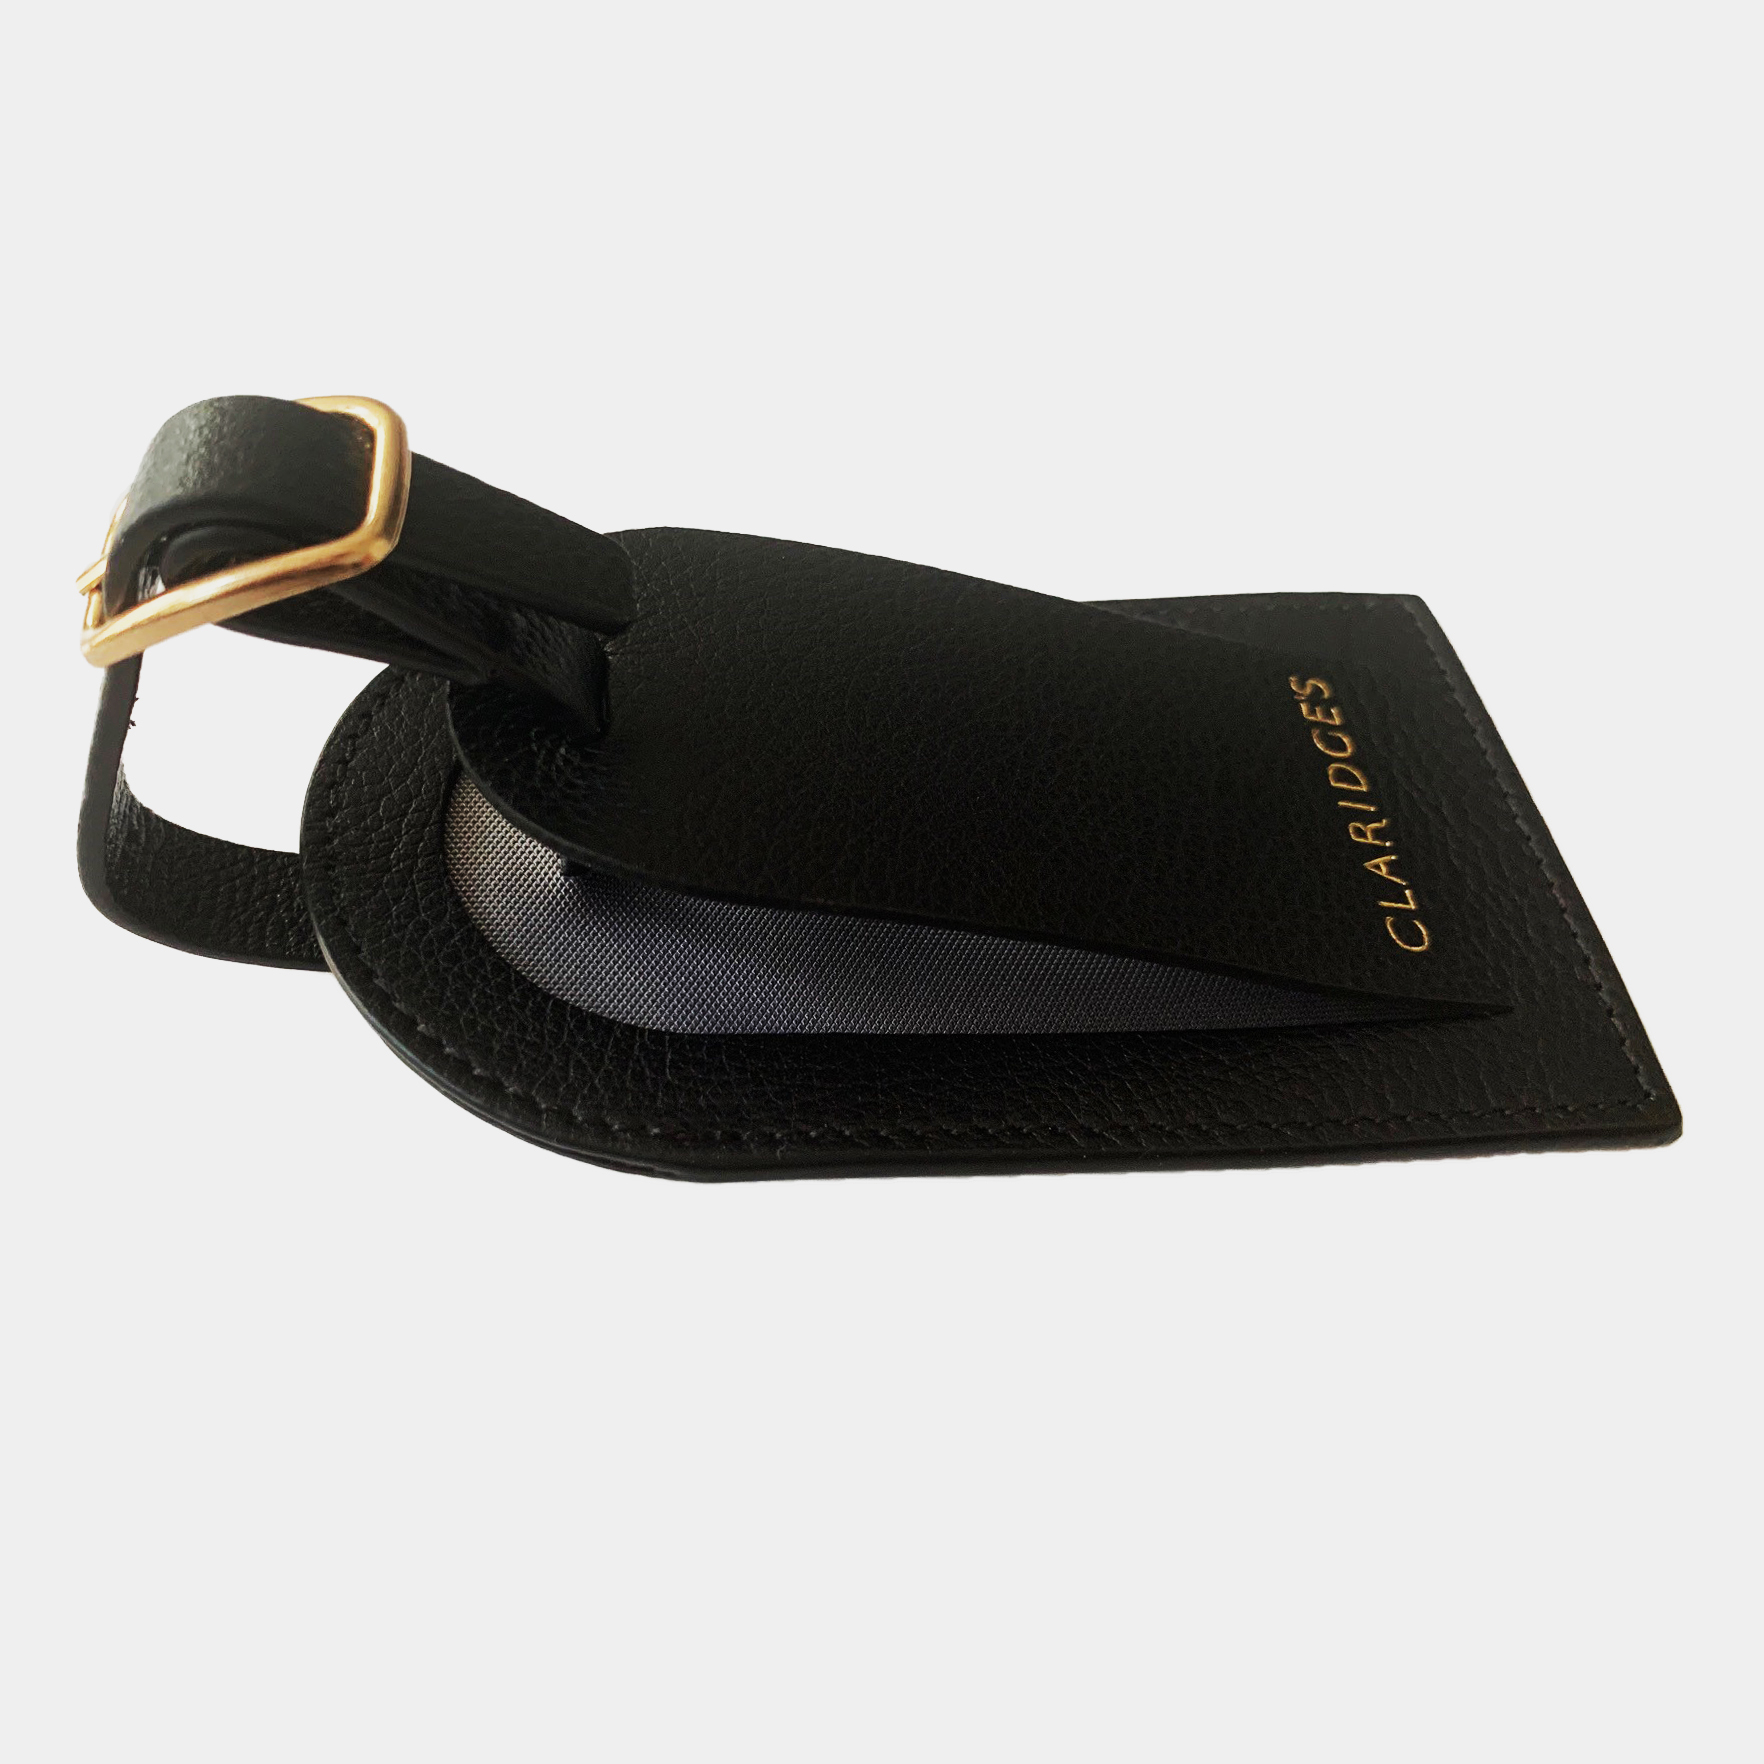 Classic luxury leather luggage tag, branded with your company logo for travel gifting